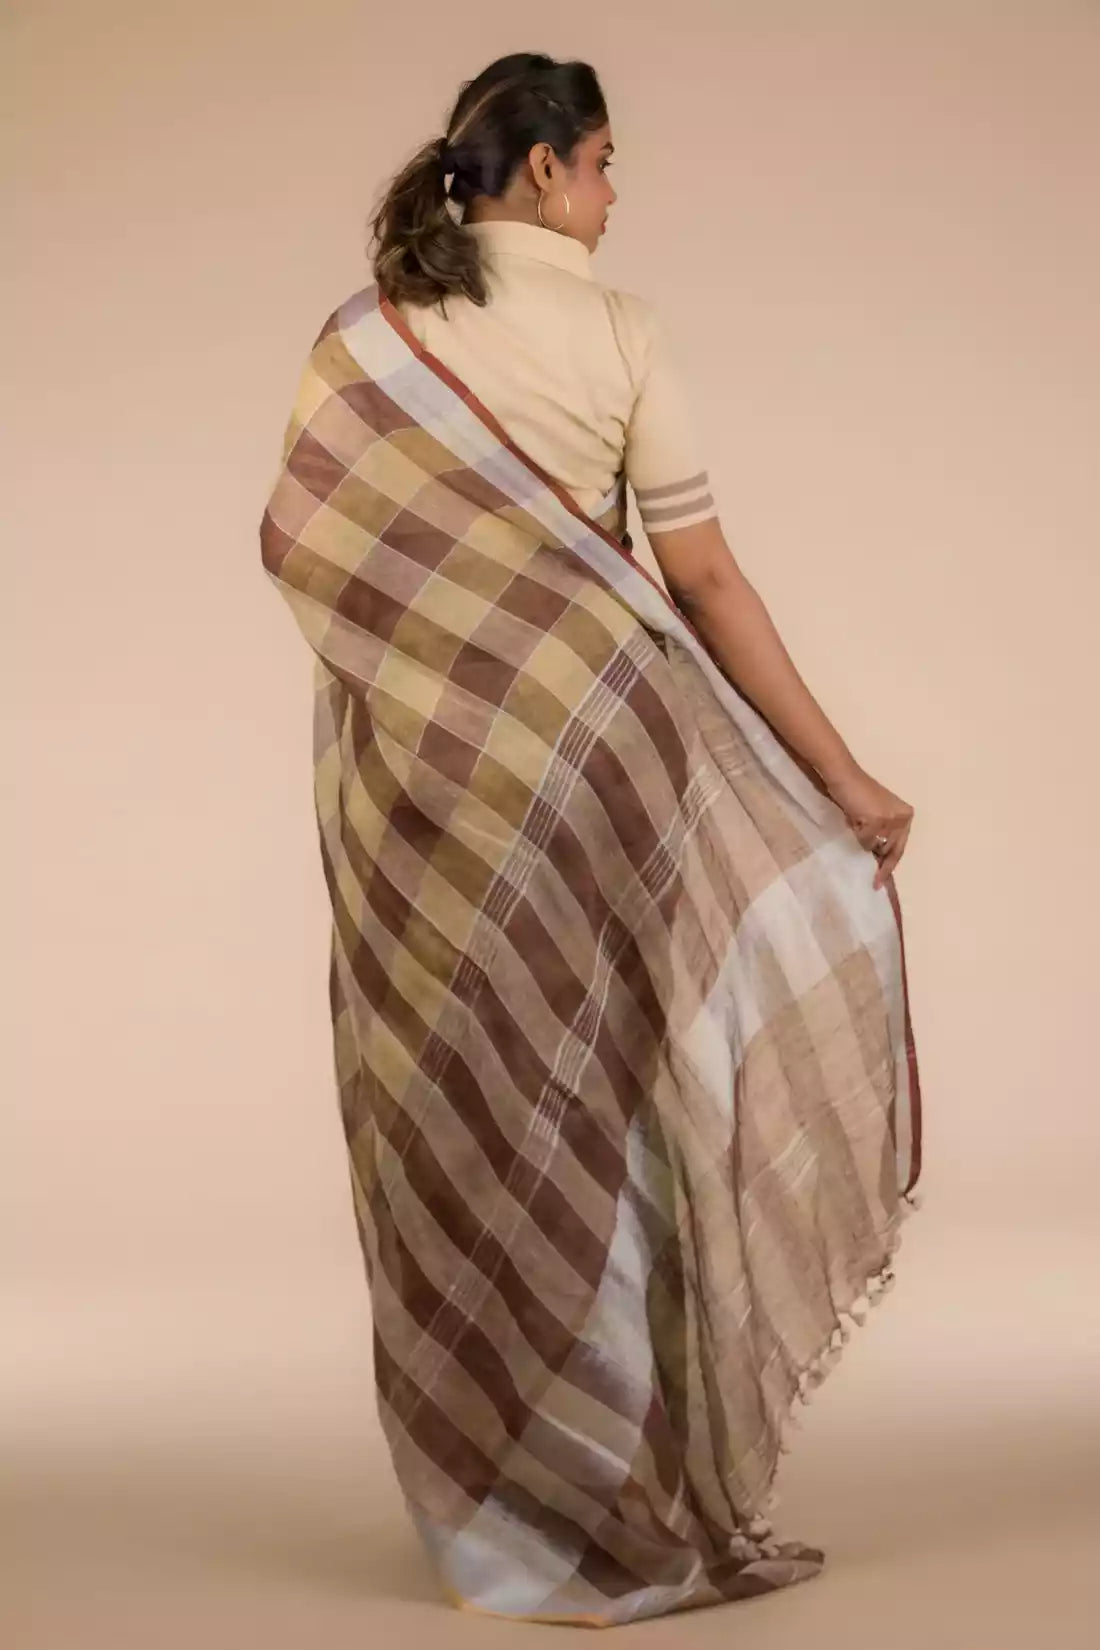 back view of a woman in ethnic posing wearing brown & beige checks saree with tie top blouse, flaunting loose end of her saree